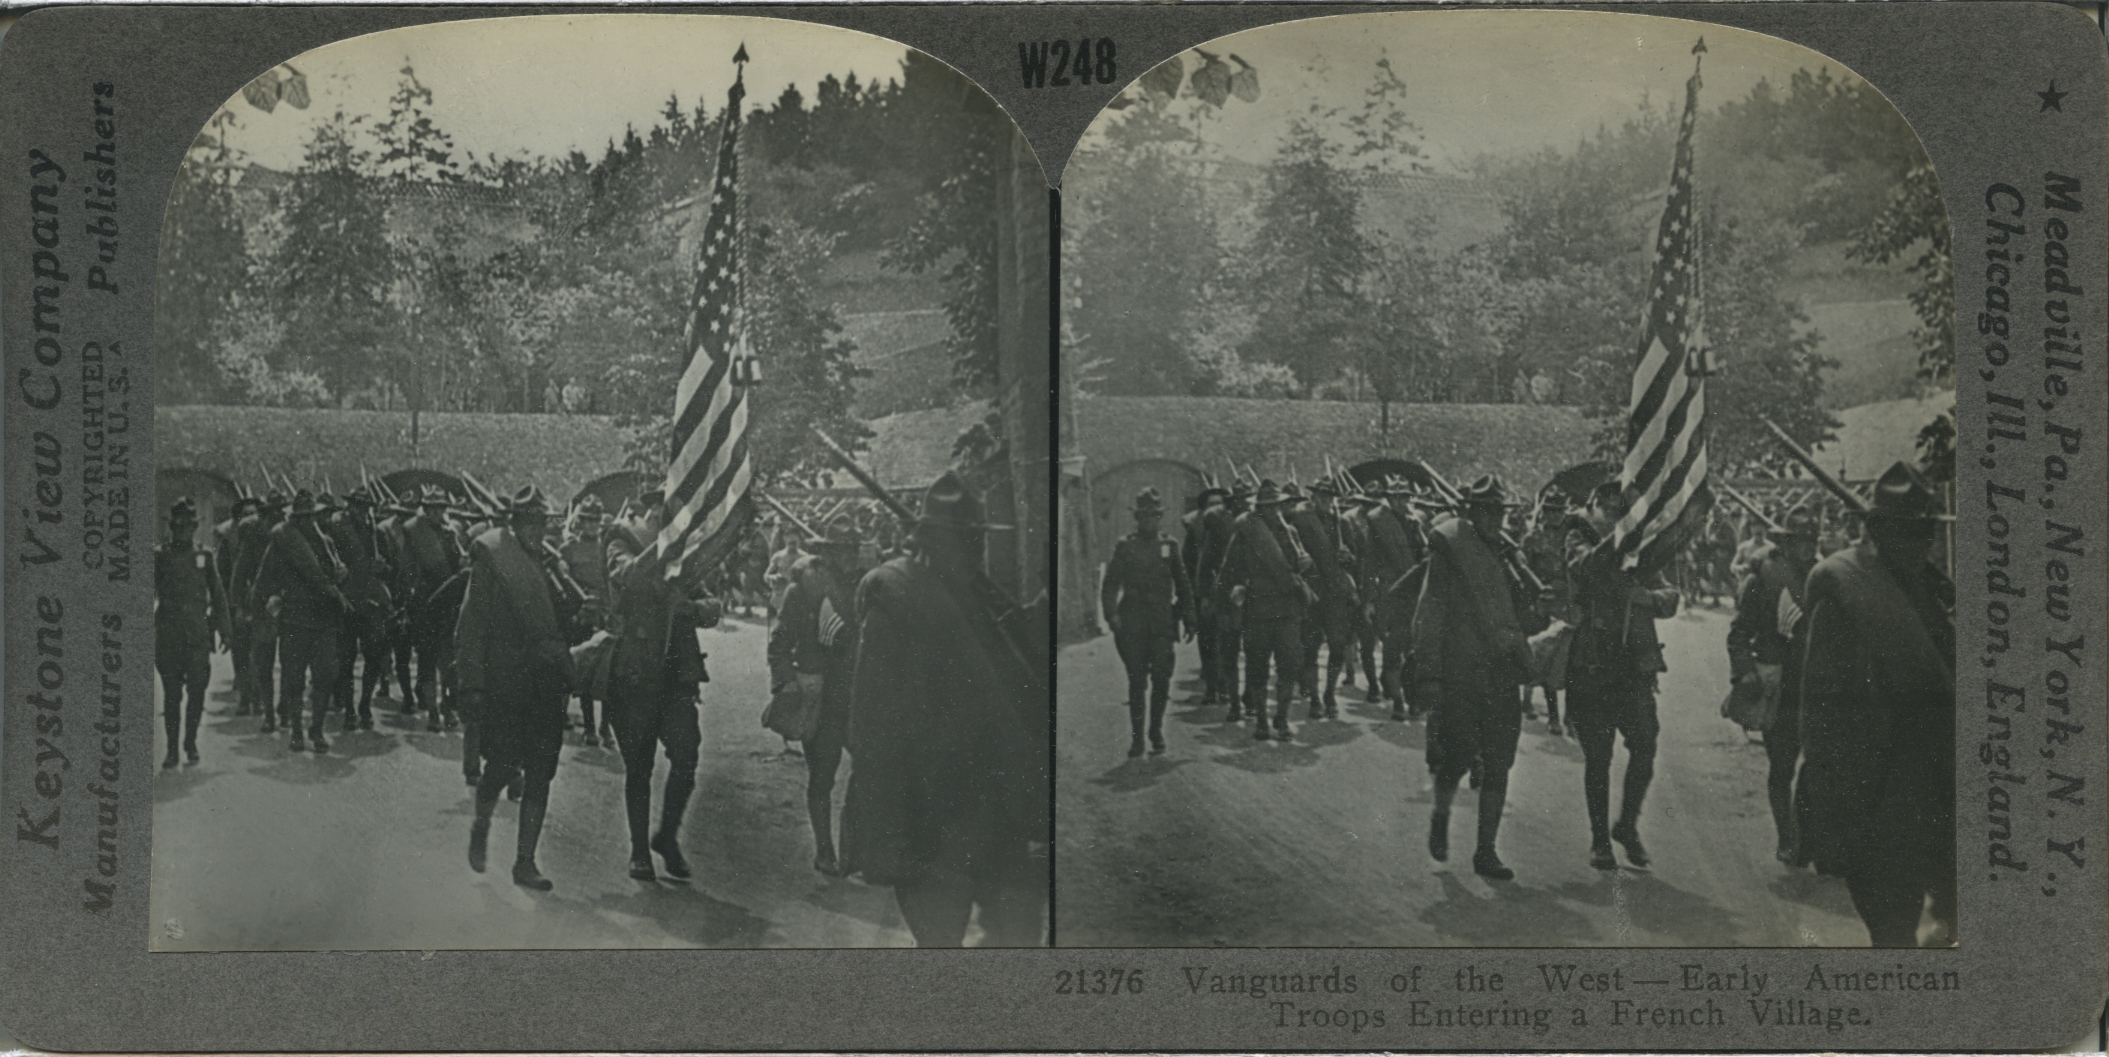 Vanguards of the West--Early American Troops Entering a French Village